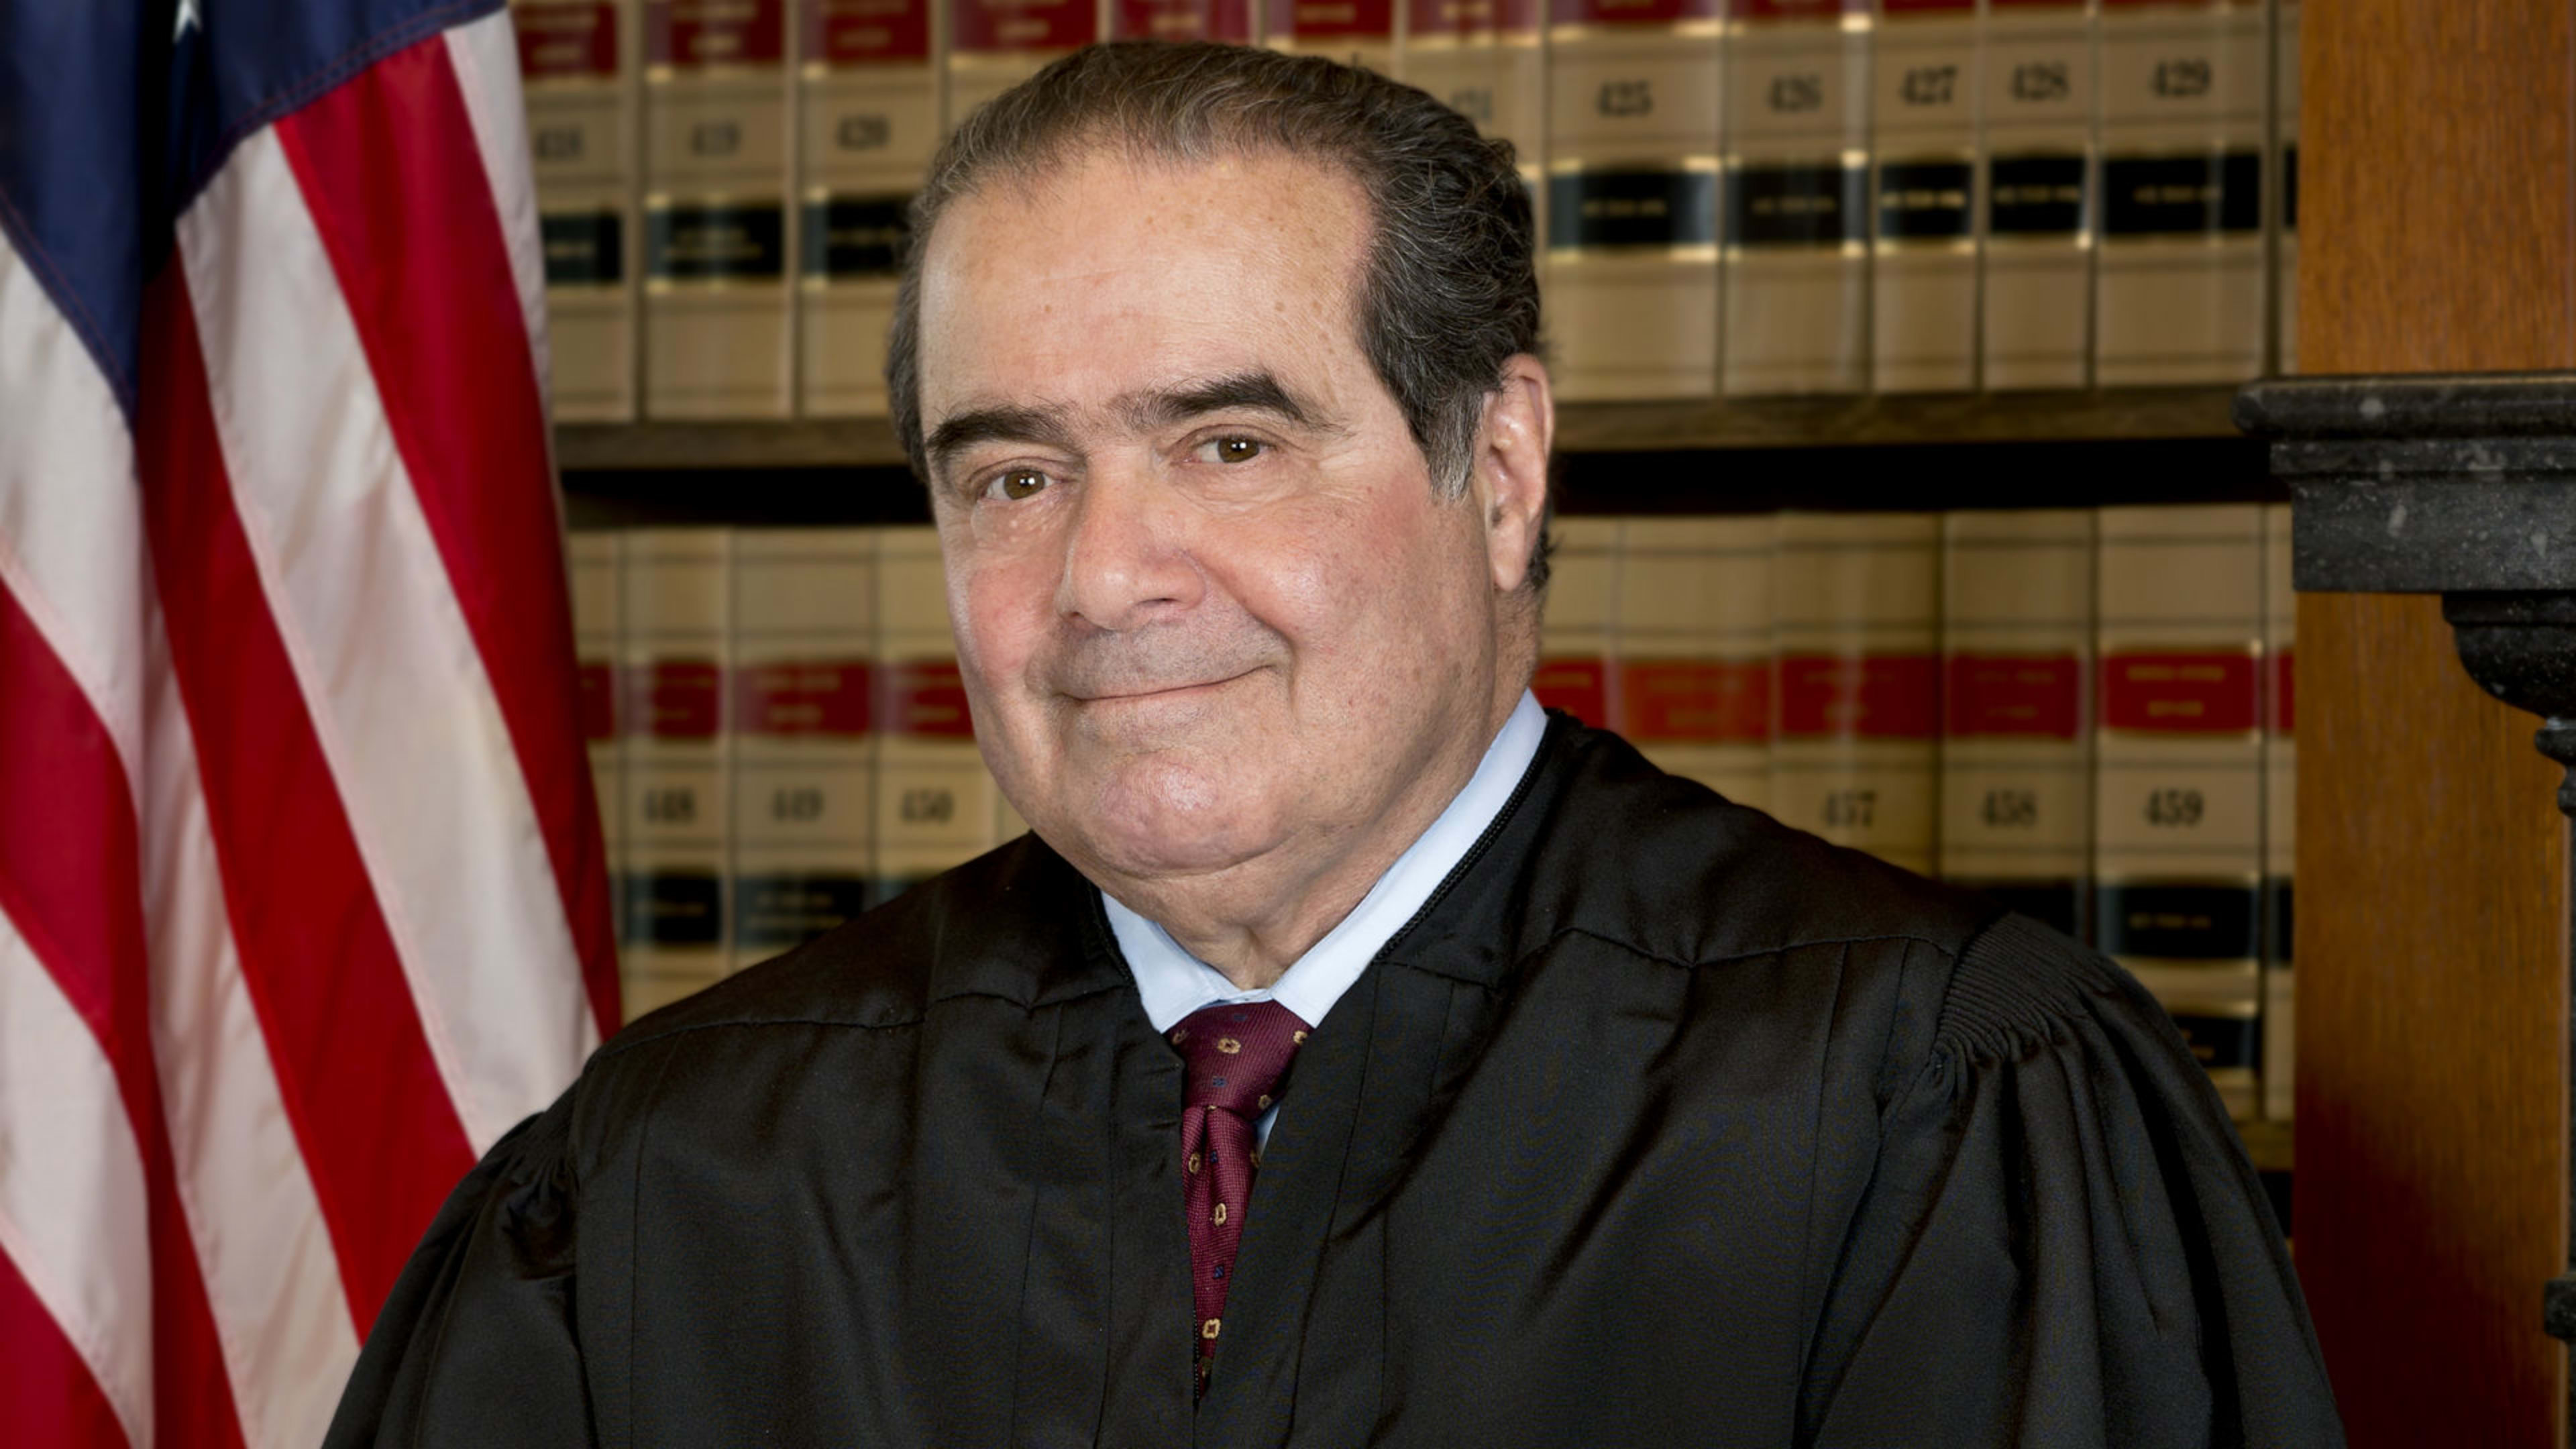 The Passing Of Justice Scalia: What Happens Now?